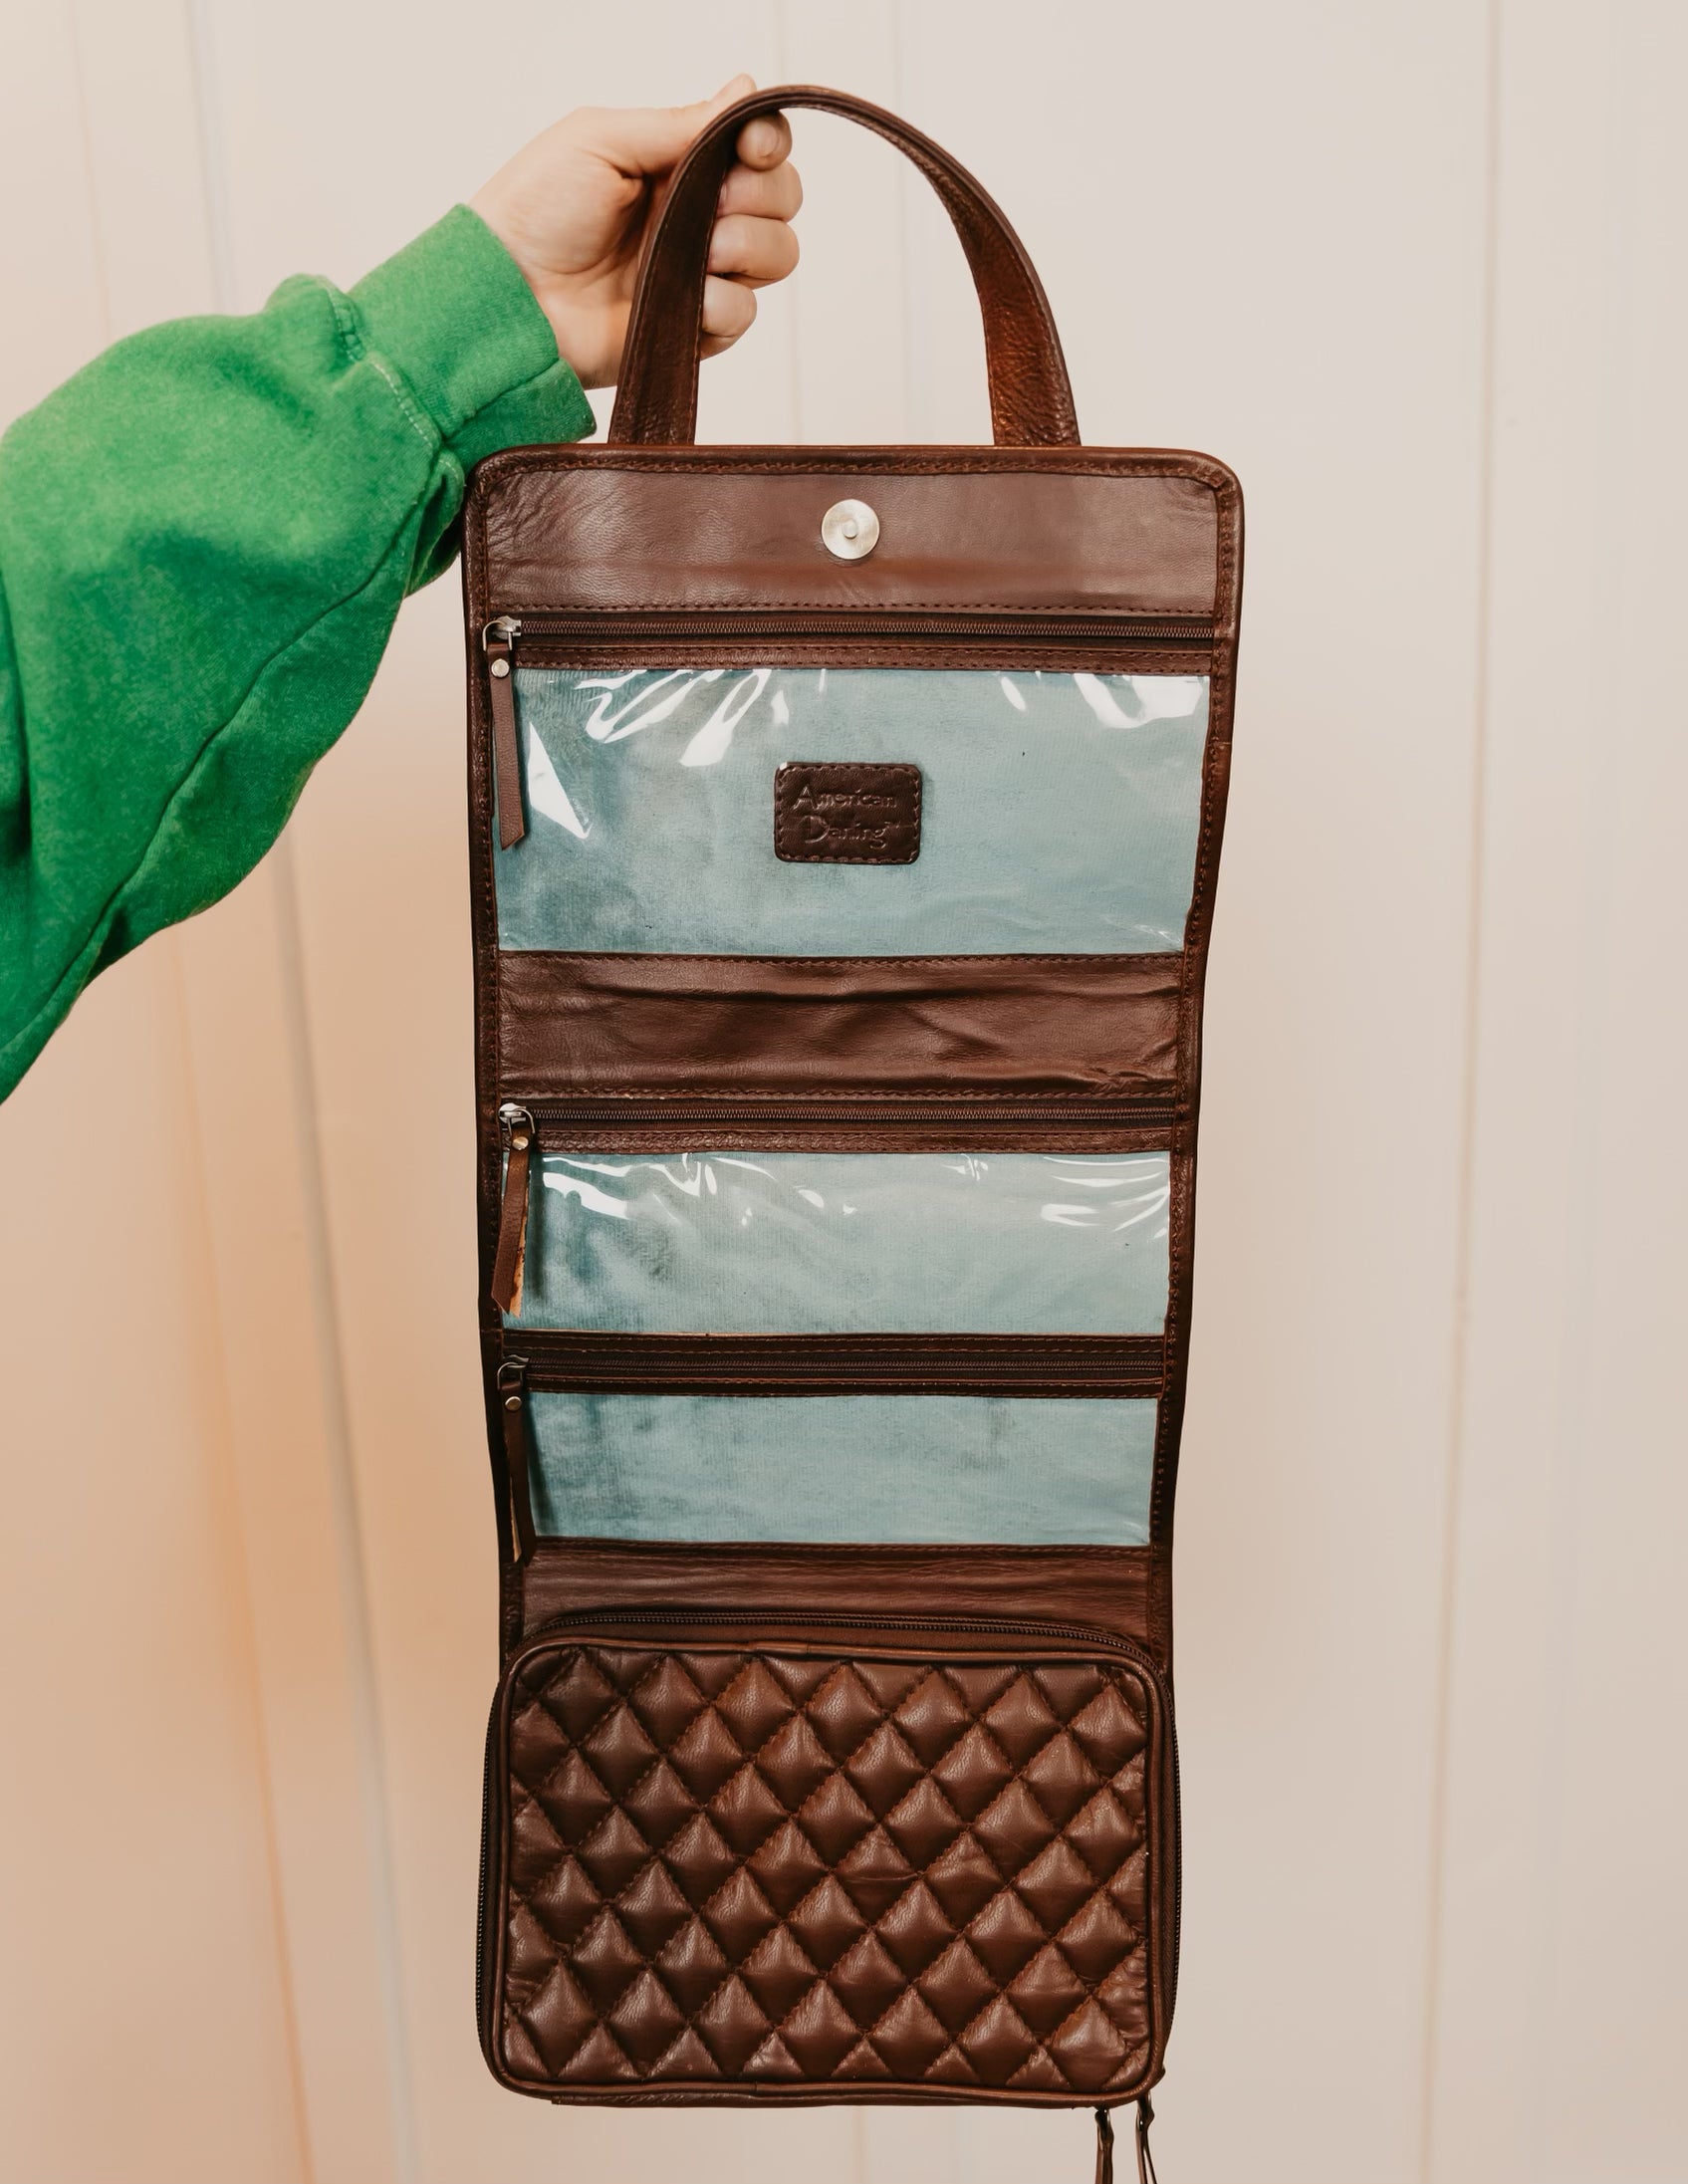 The Vail Travel Makeup Case